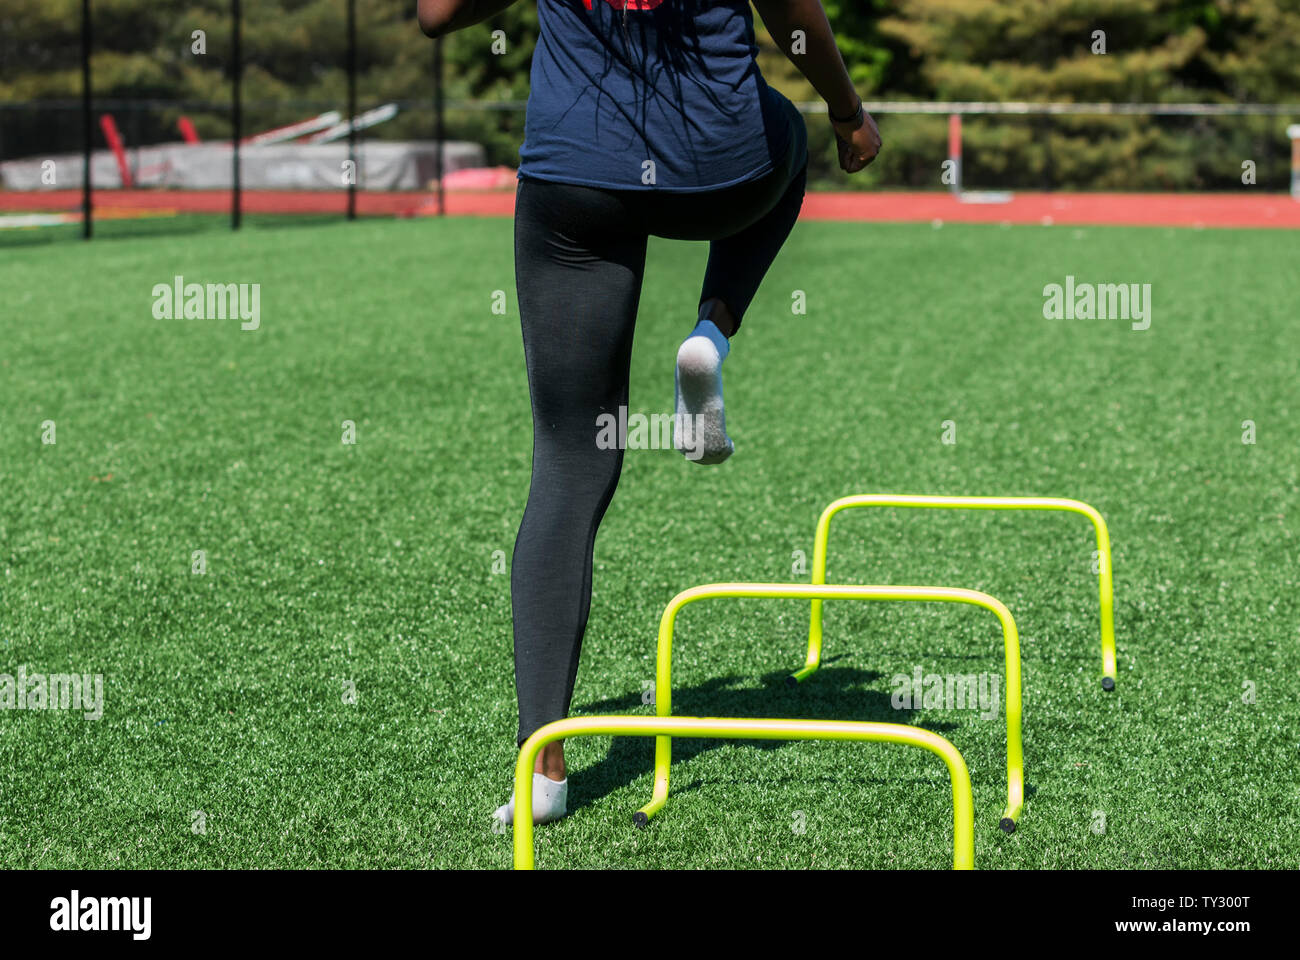 A high school girl is performing speed and agility drills over hurdles with no shoes on, only socks on a green turf field wearing black spandex. Stock Photo